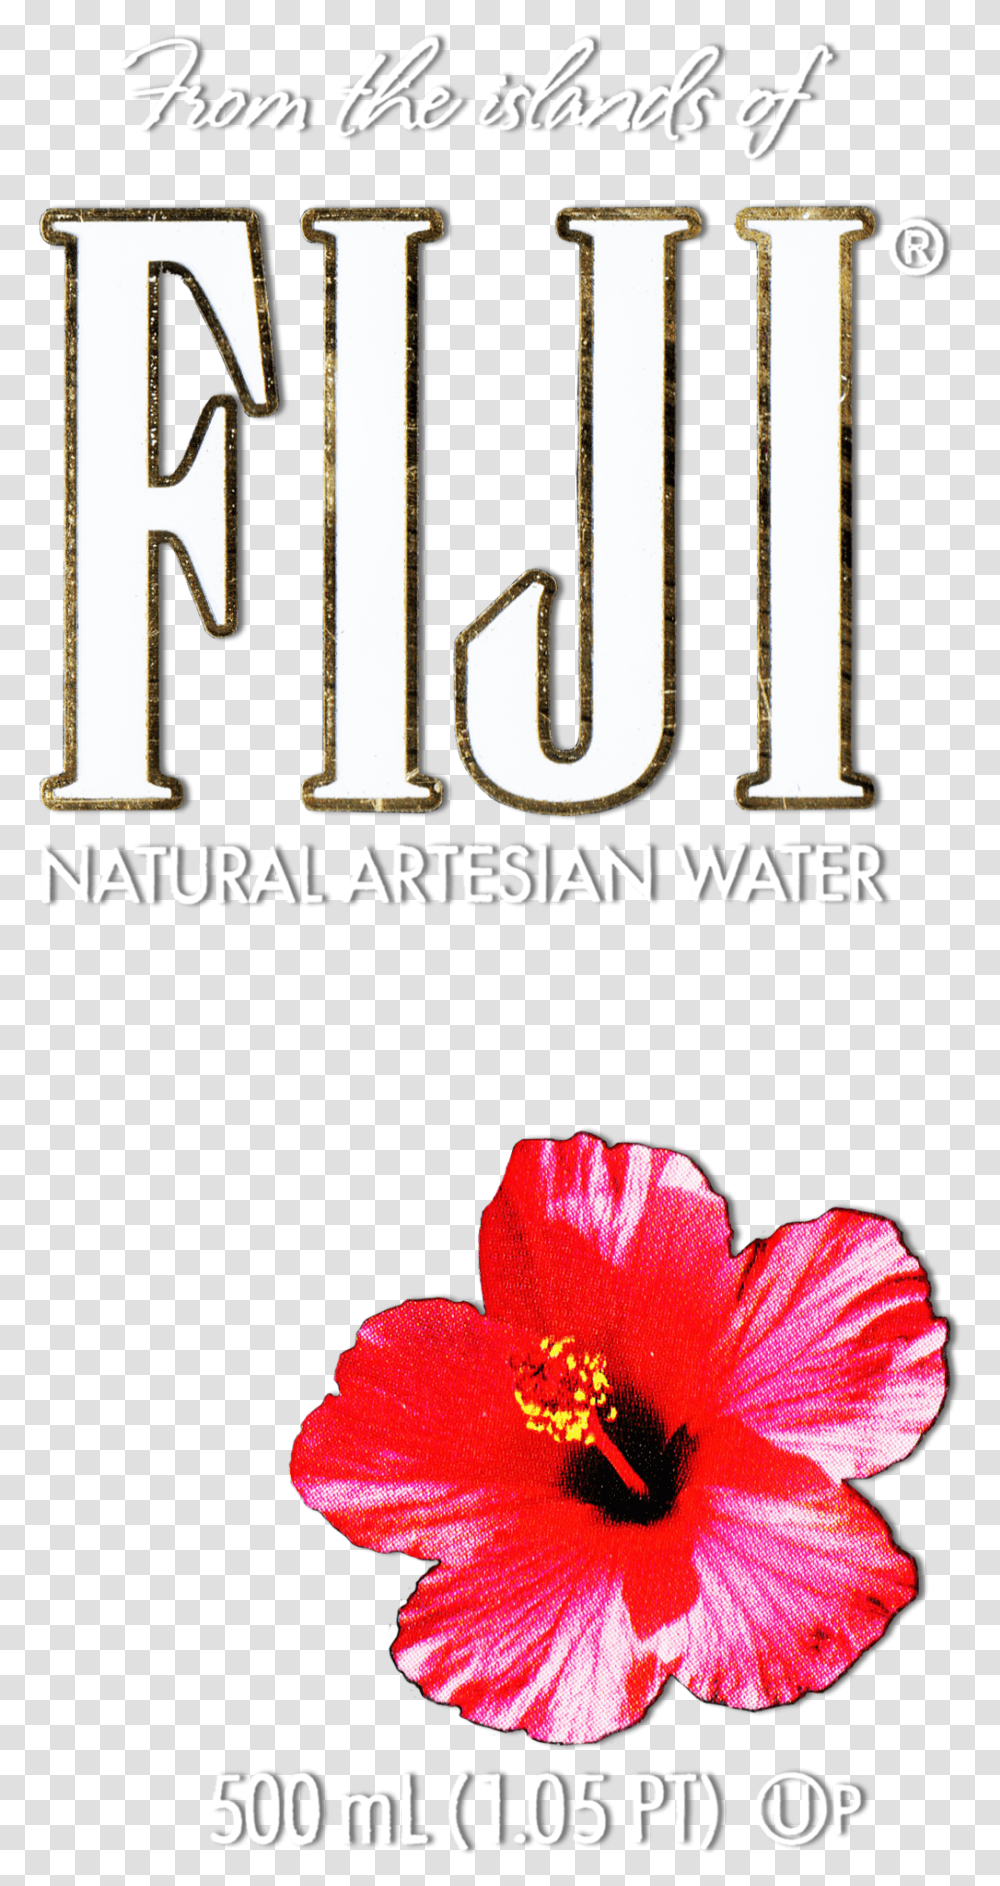 Hibiscus Flower Image Collections Fiji Water Bottle Flower, Plant, Blossom, Number Transparent Png